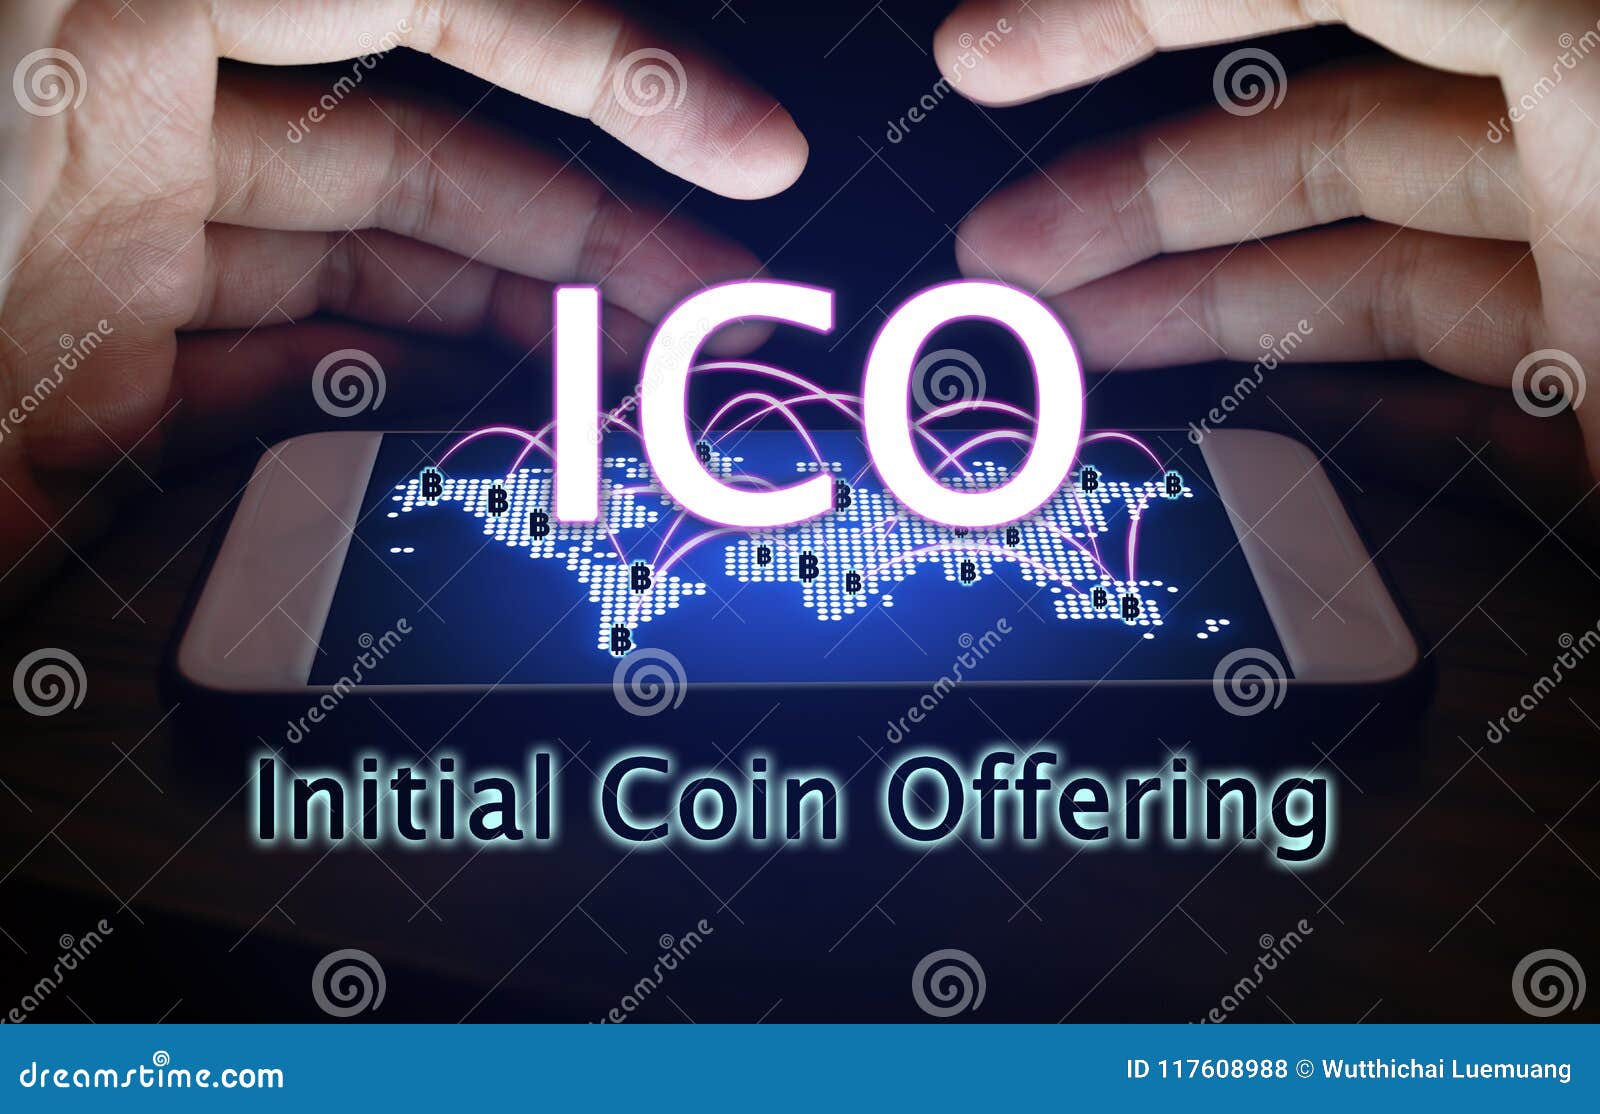 initial coin offering and hand man protection smartphone with ico concept.